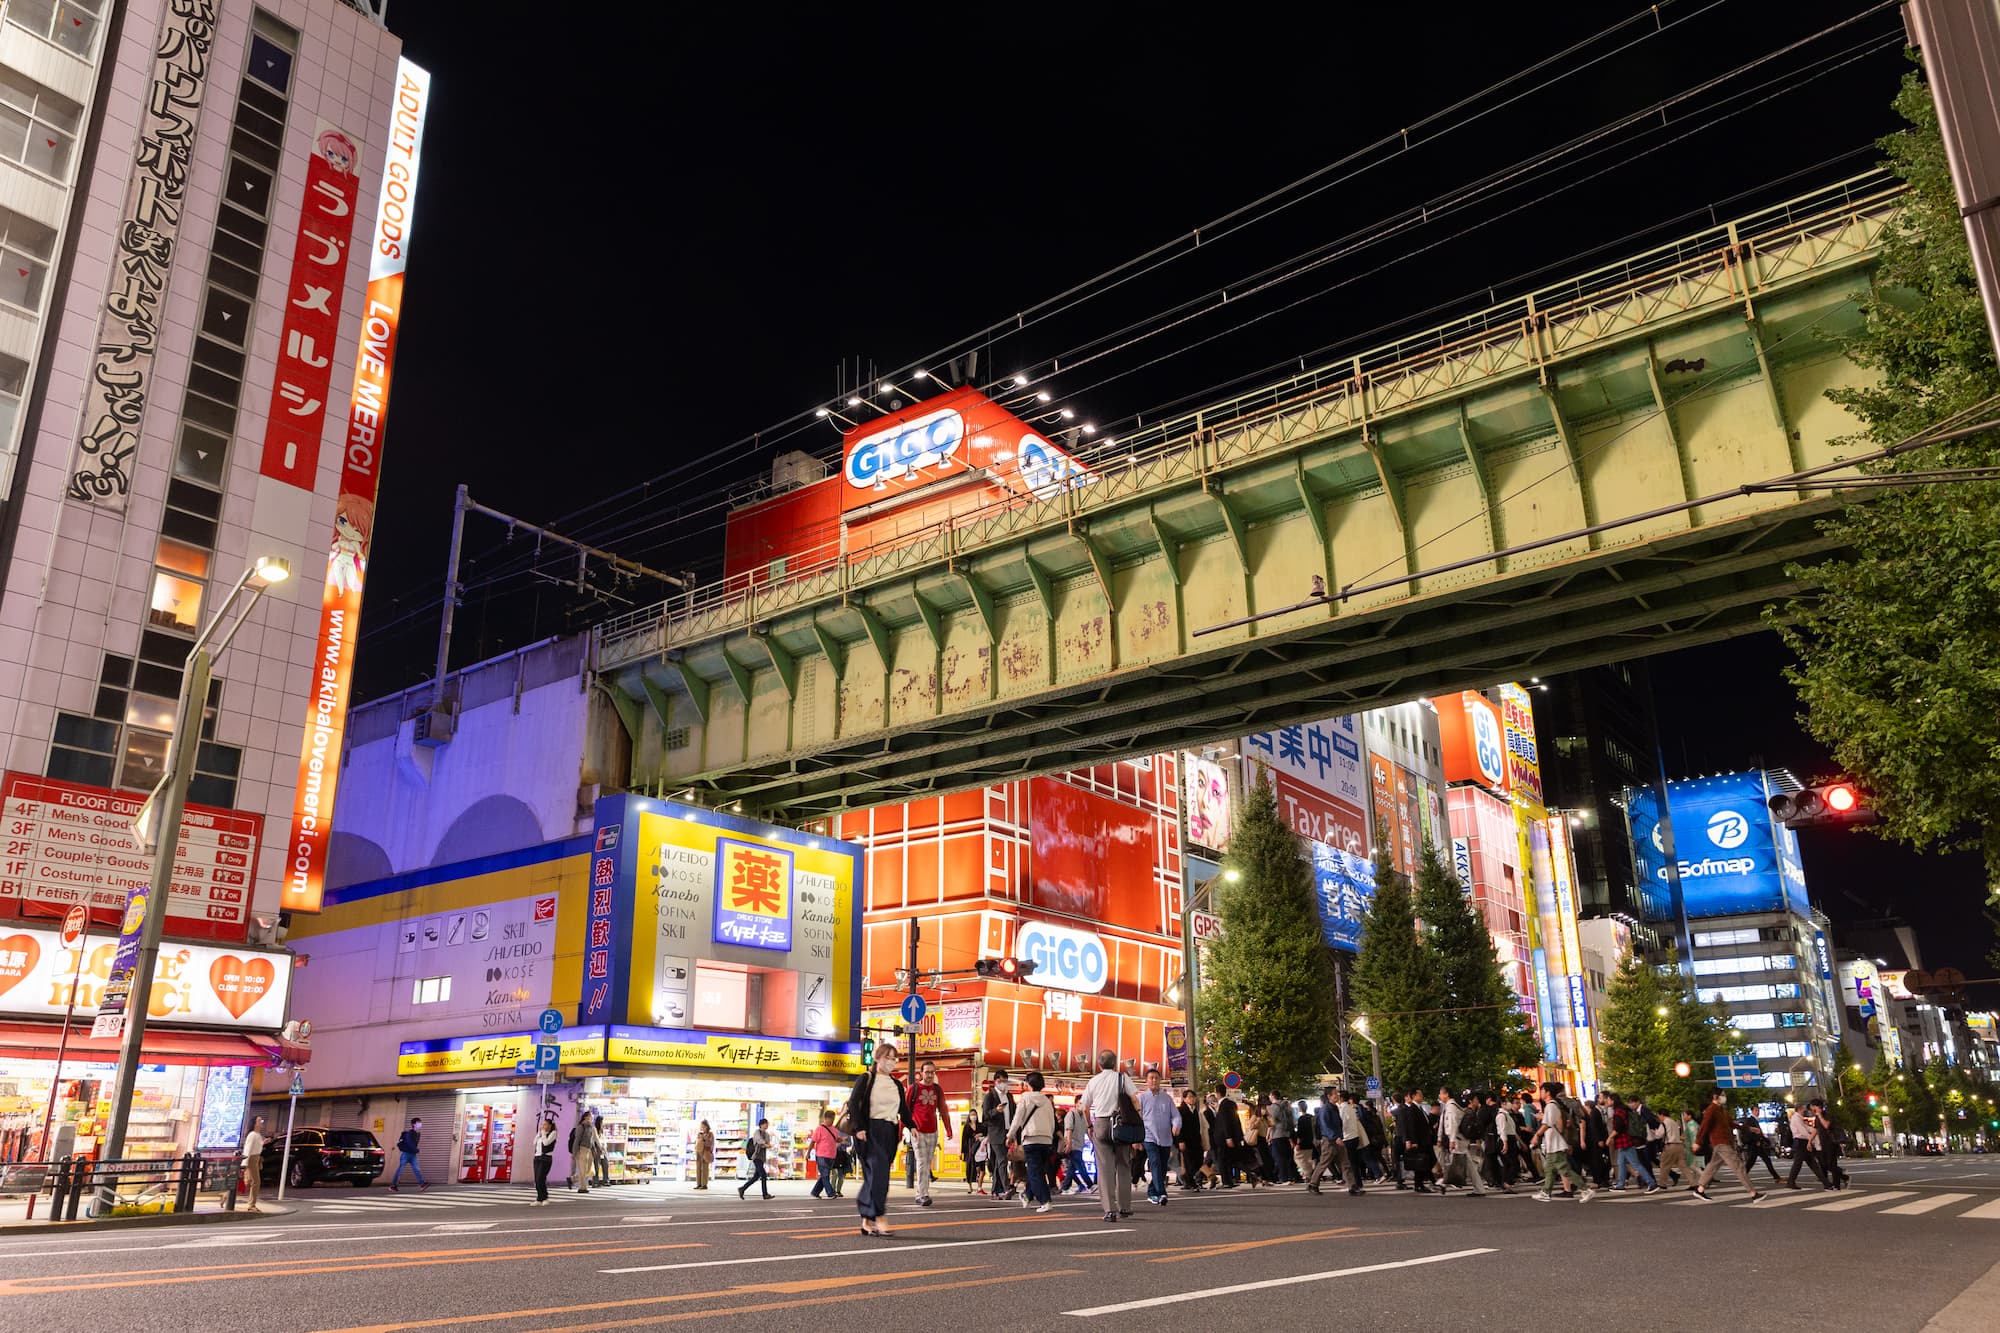 Good location, about 5 minutes walk from Akihabara Station